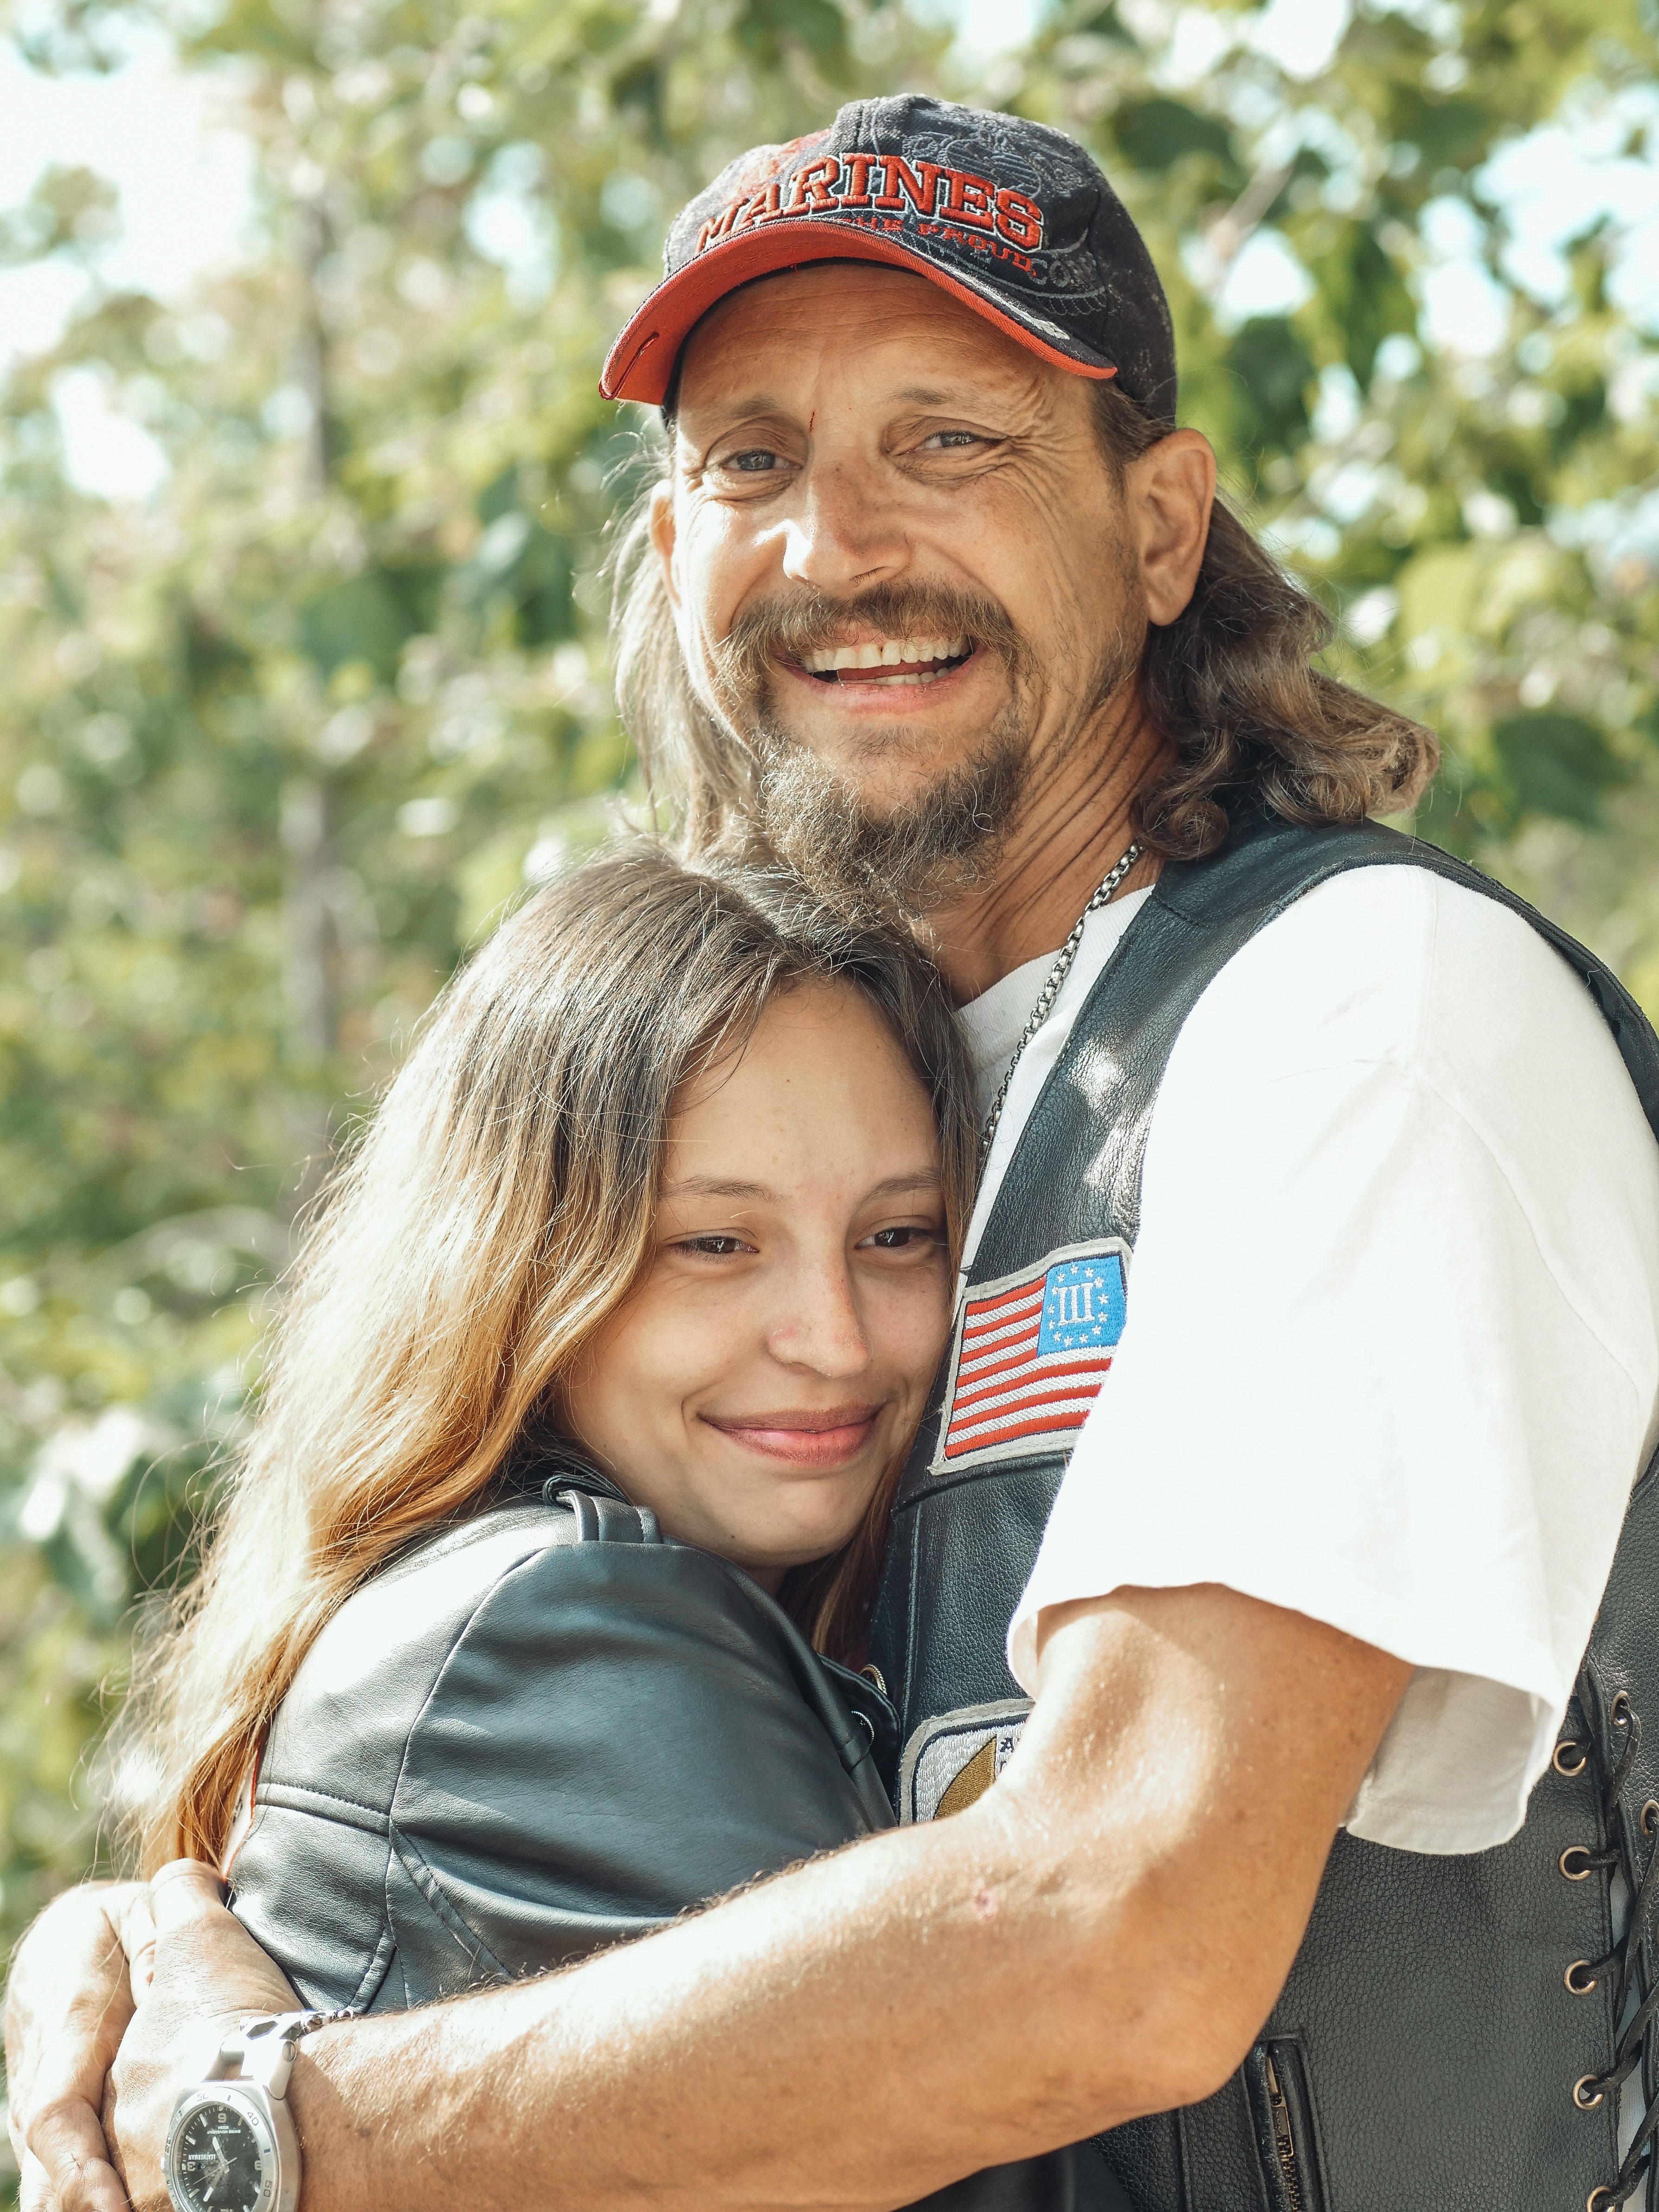 A father and daughter hugging each other | Photo: Pexels